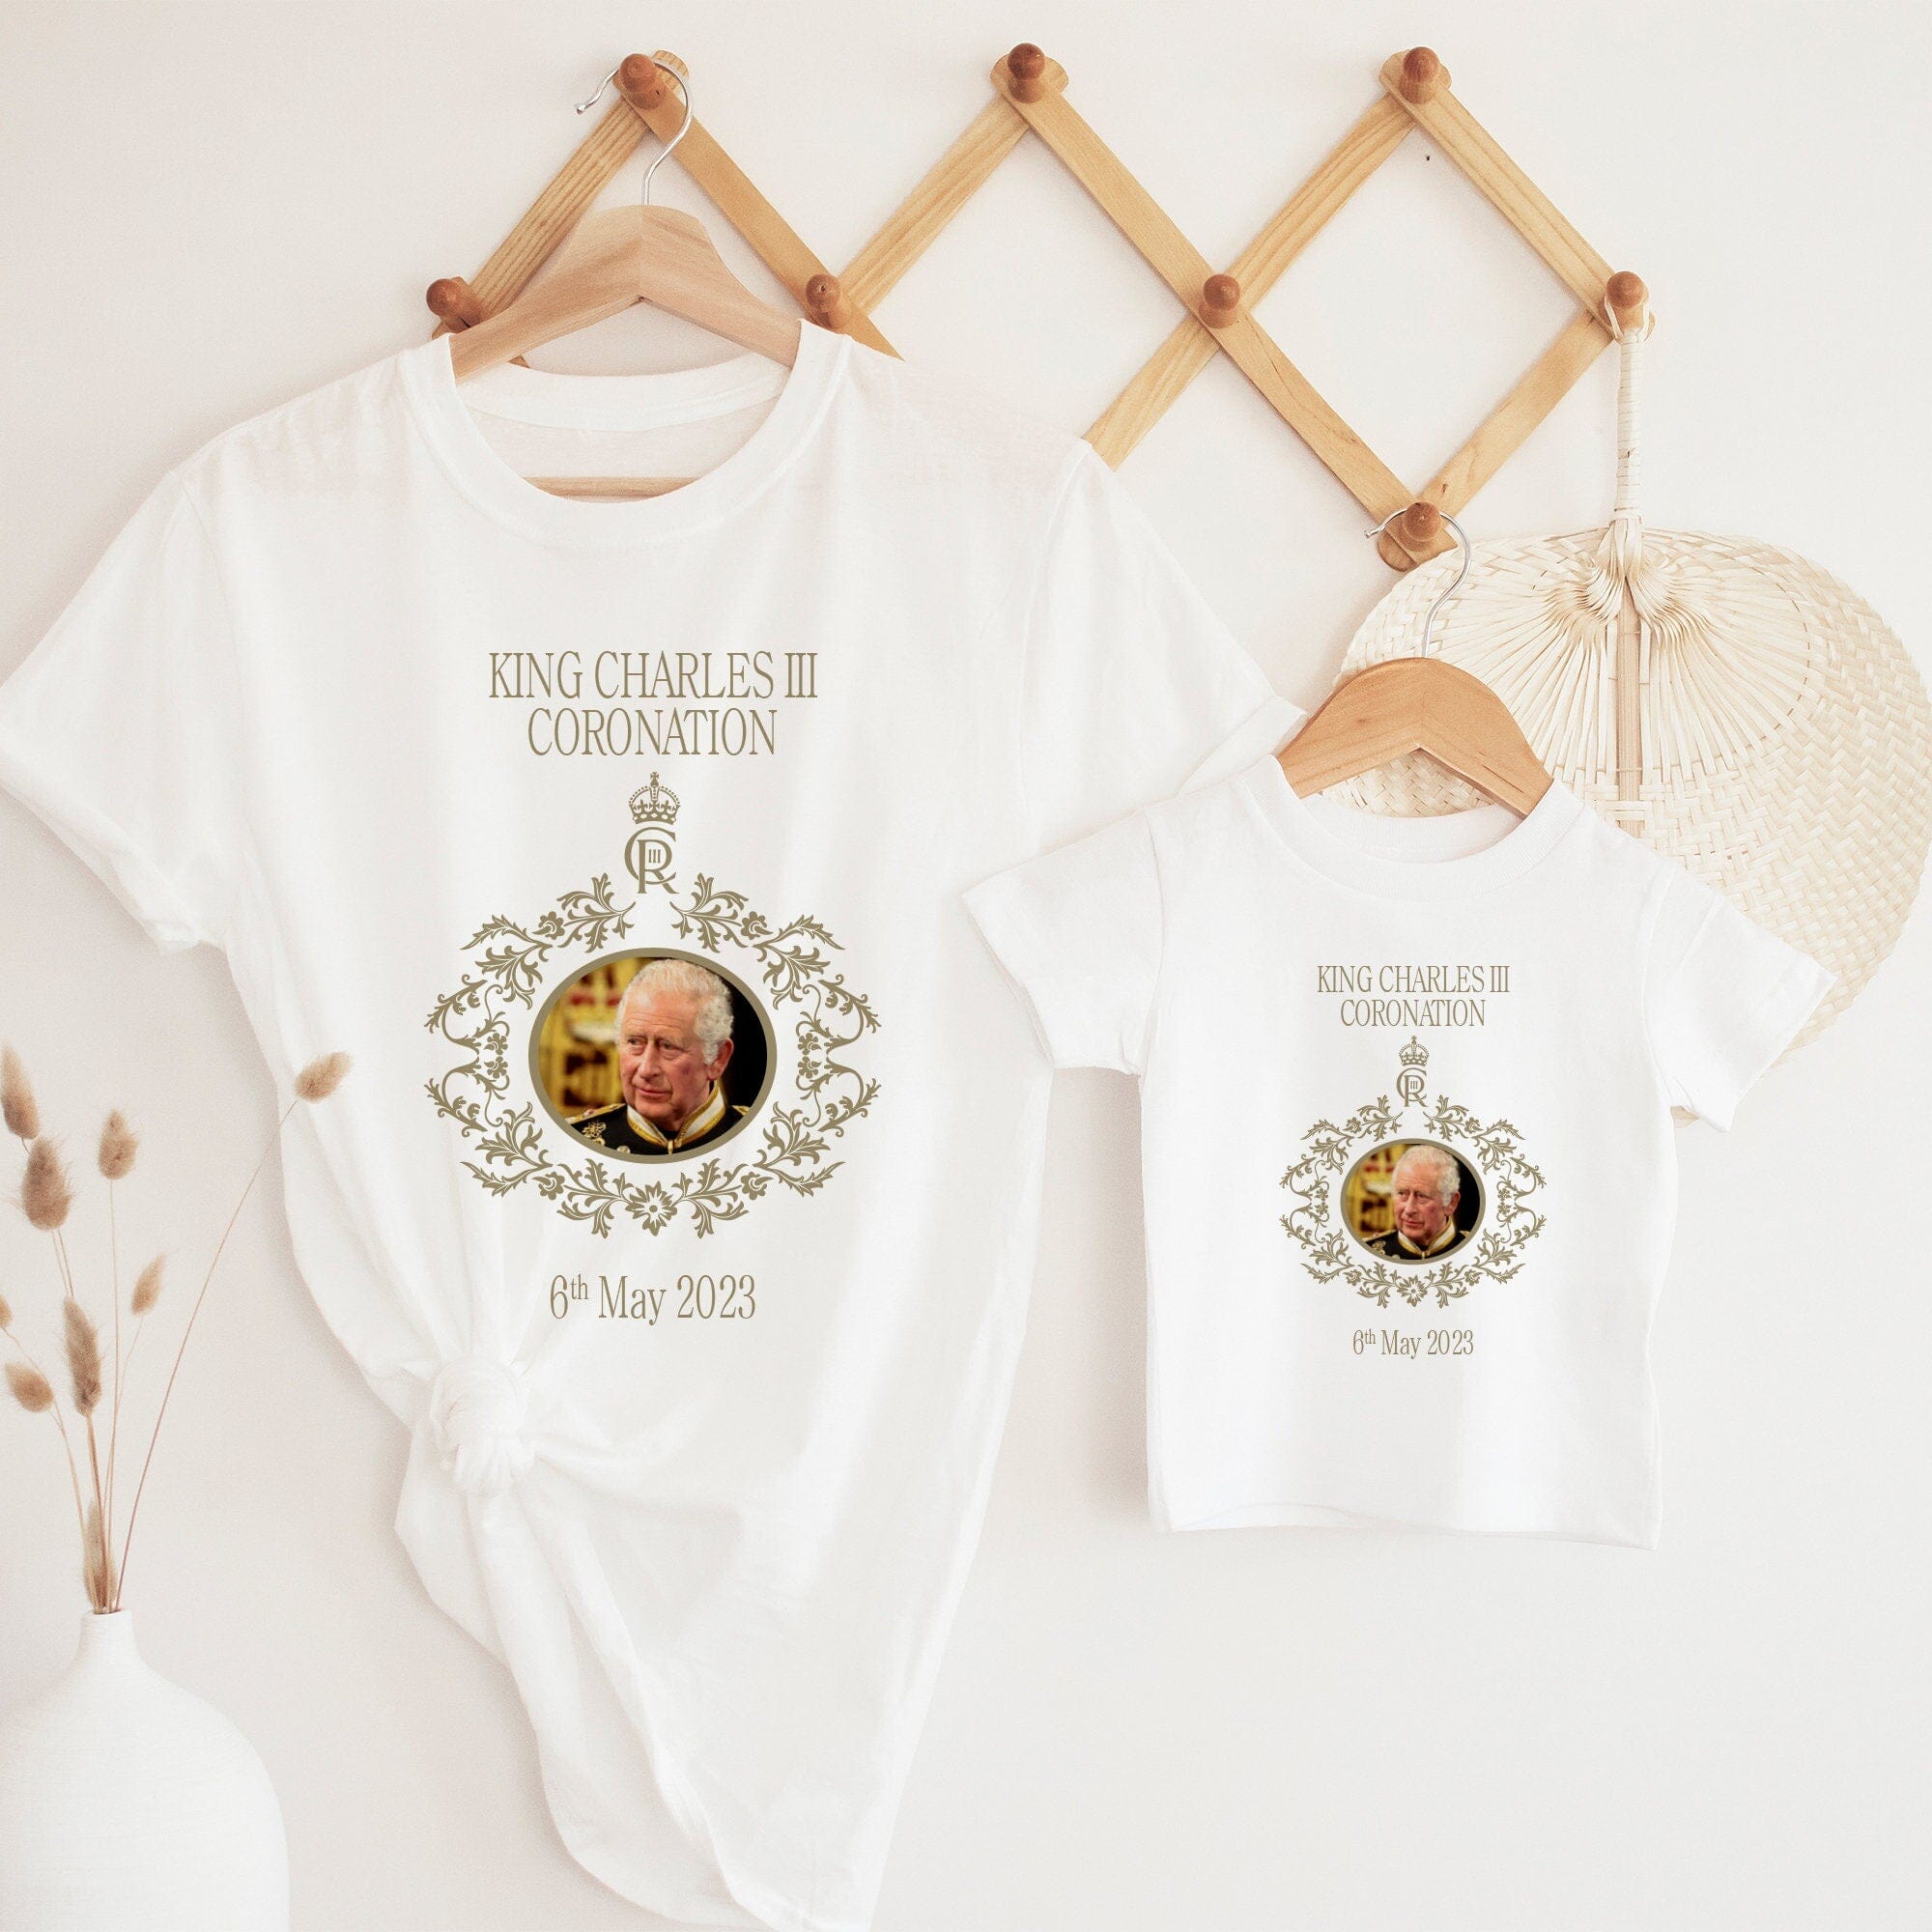 Coronation t-shirt, HM King Charles III, God save the king 6th May 2023 , Commemorative Celebration Party outfit